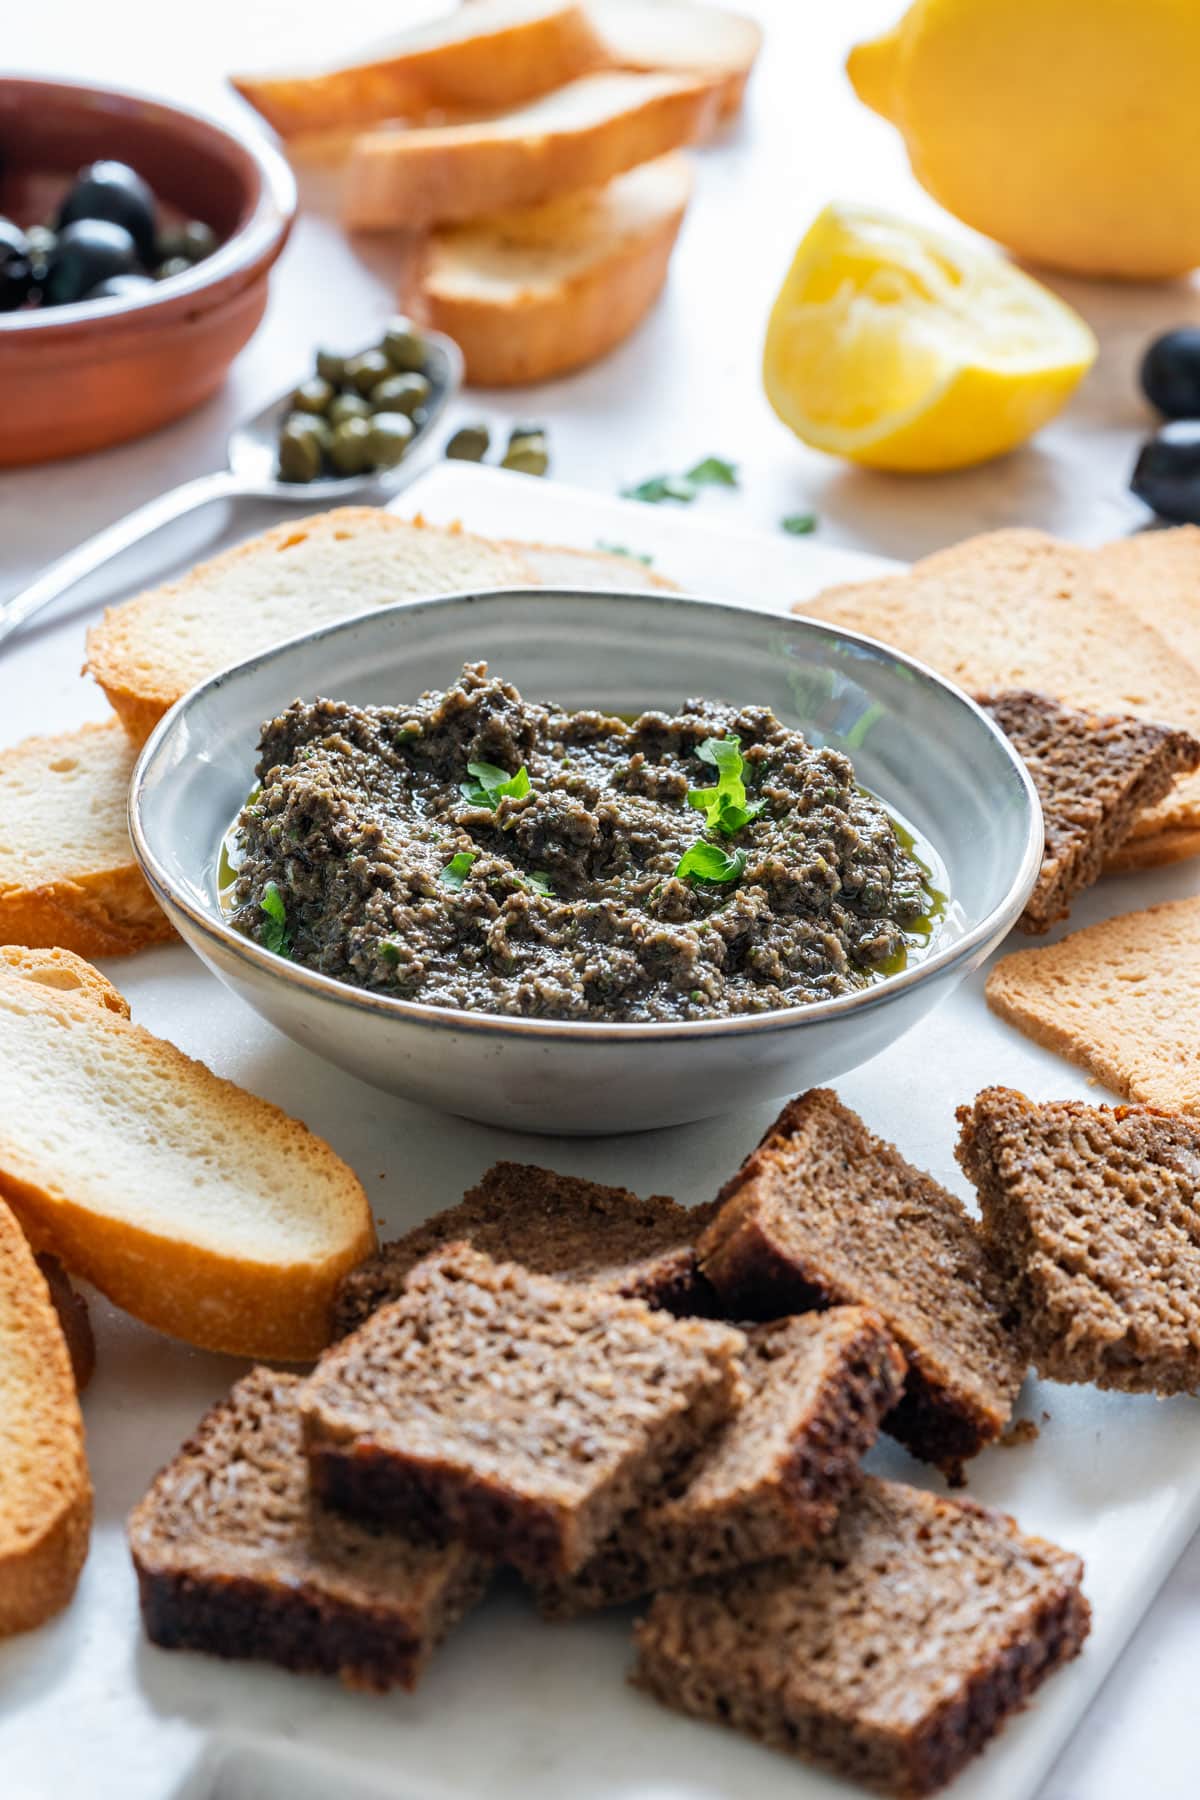 Homemade olive tapenade with breads and black olives.